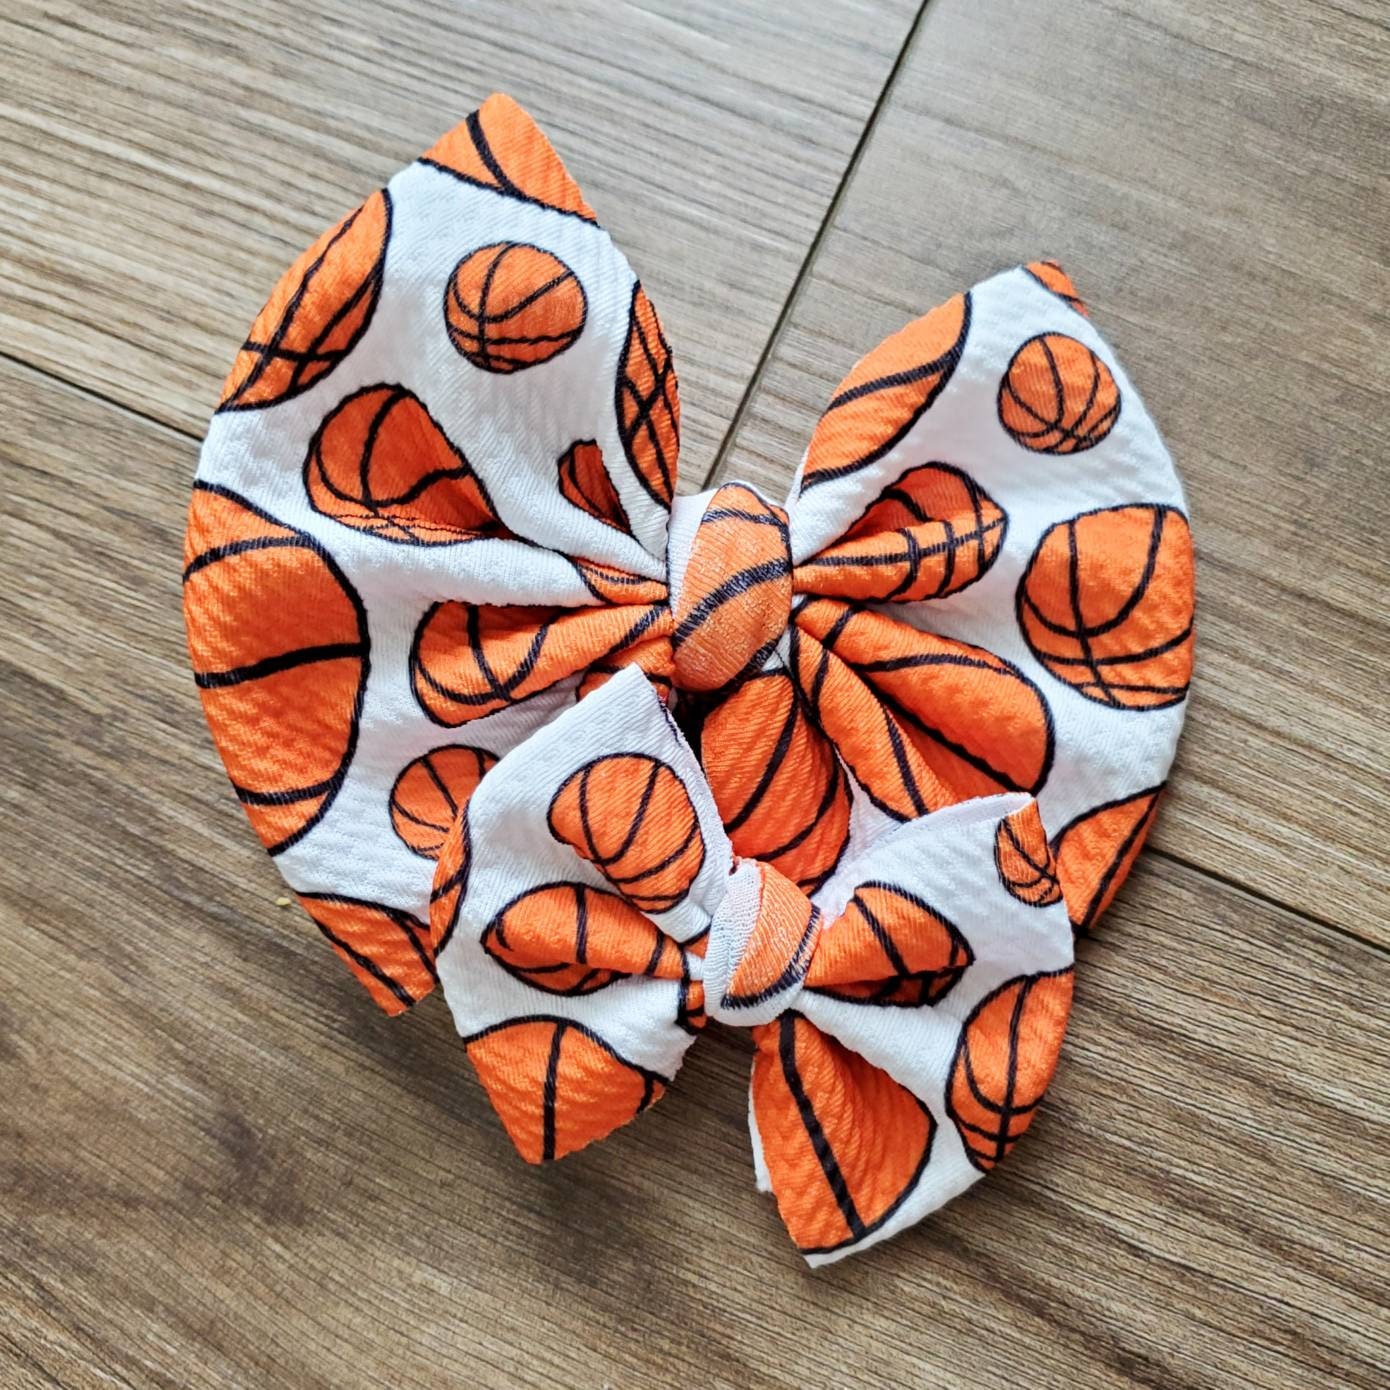 kenziesboutique1 Personalized Sports Hair Bow for Girls Hair Tie Accessory- Custom White Preppy Bow - Cheer 8 Bow - Ribbon Basketball Volleyball Soccer Softball